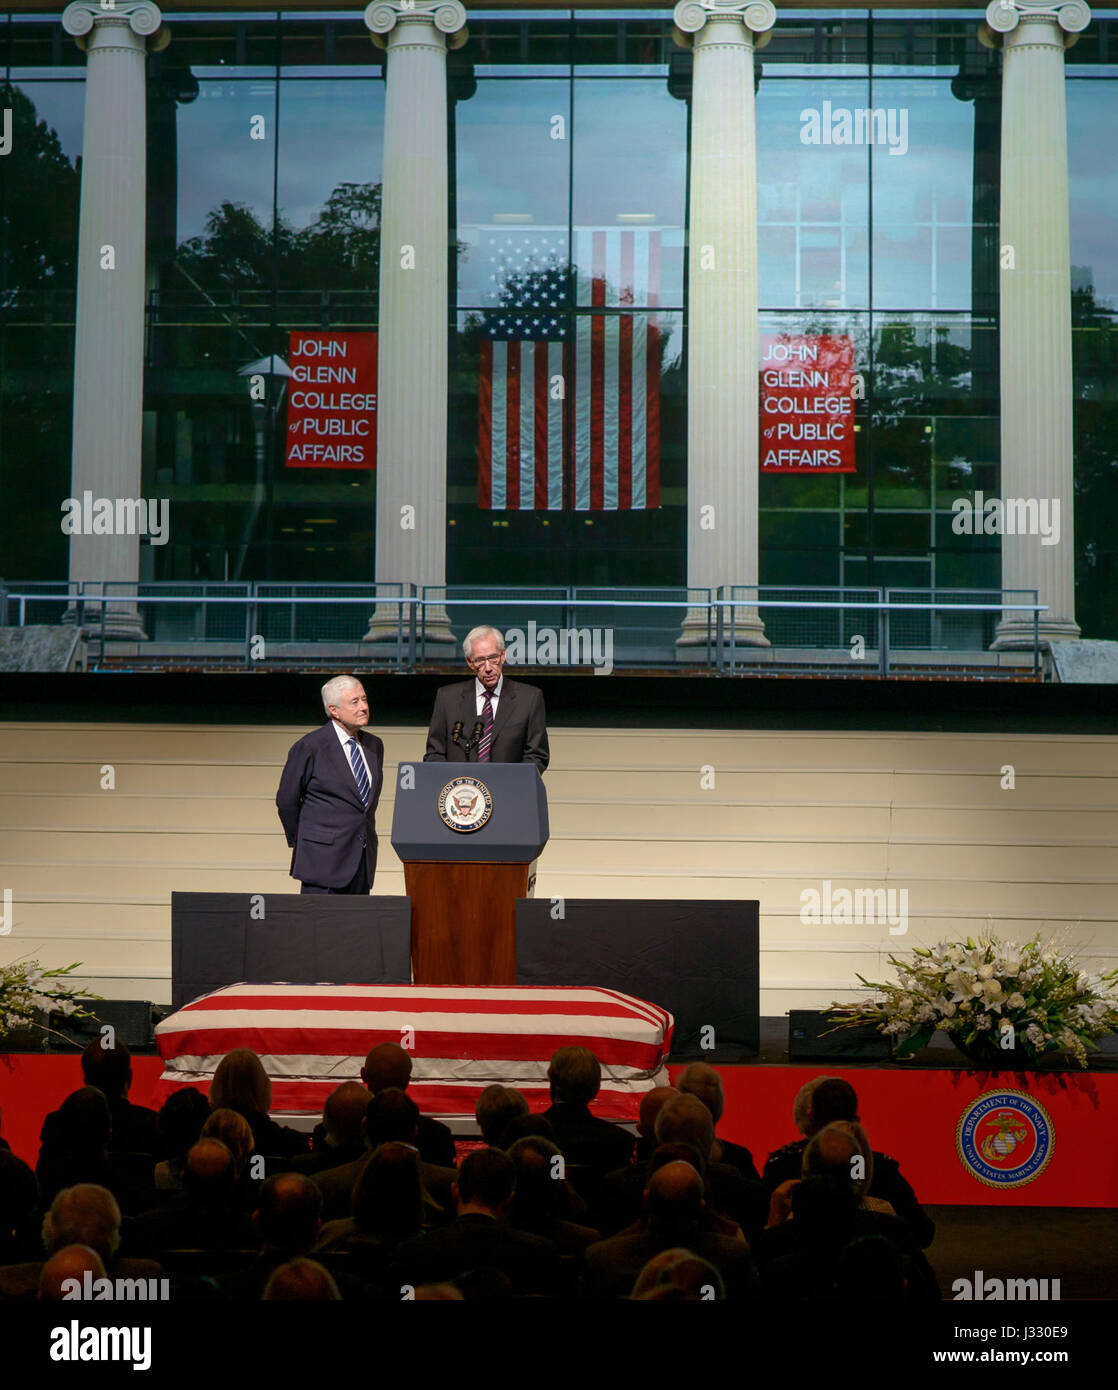 Cincinnati banker and hotelier Louis Beck speaks as New Albany Company Cofounder and Chairman Jack Kessler looks on during a service celebrating the life of former astronaut and U.S. Senator John Glenn, Saturday, Dec. 17, 2016 at The Ohio State University, Mershon Auditorium in Columbus. Photo Credit: (NASA/Bill Ingalls) Stock Photo